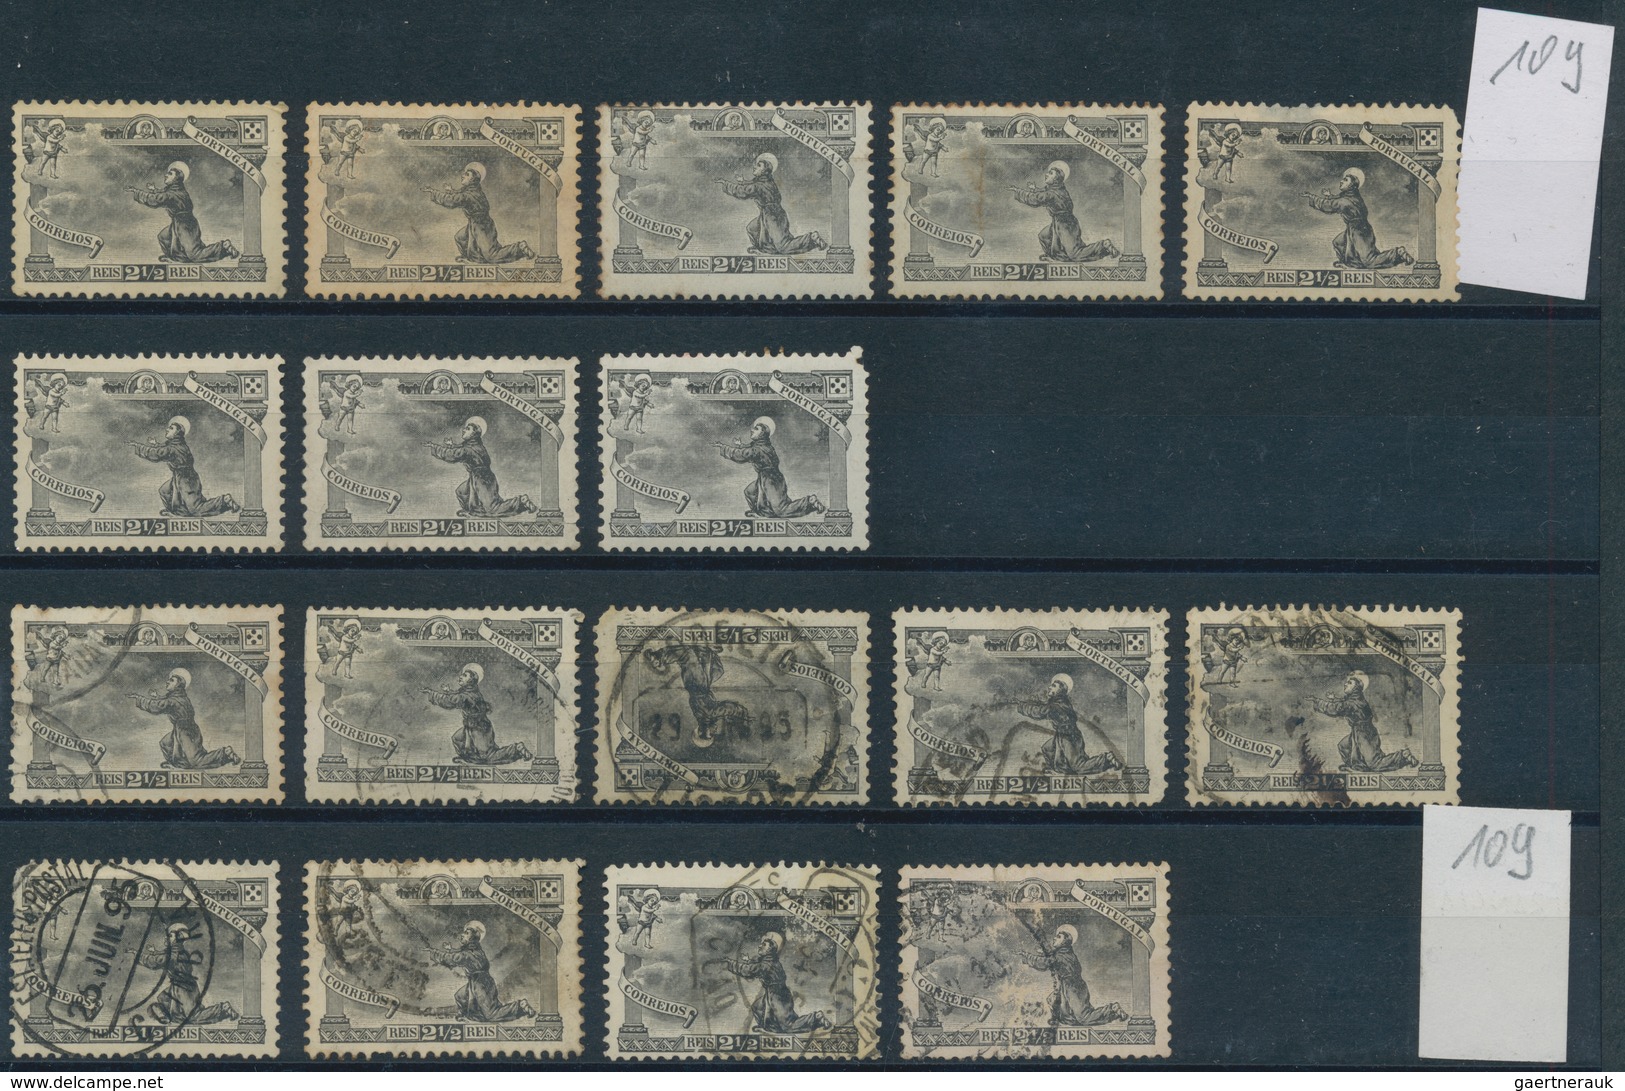 Portugal: 1894/1895, nice lot with only value of the sets ""Prince Henry" and "Siant Antonio" used a